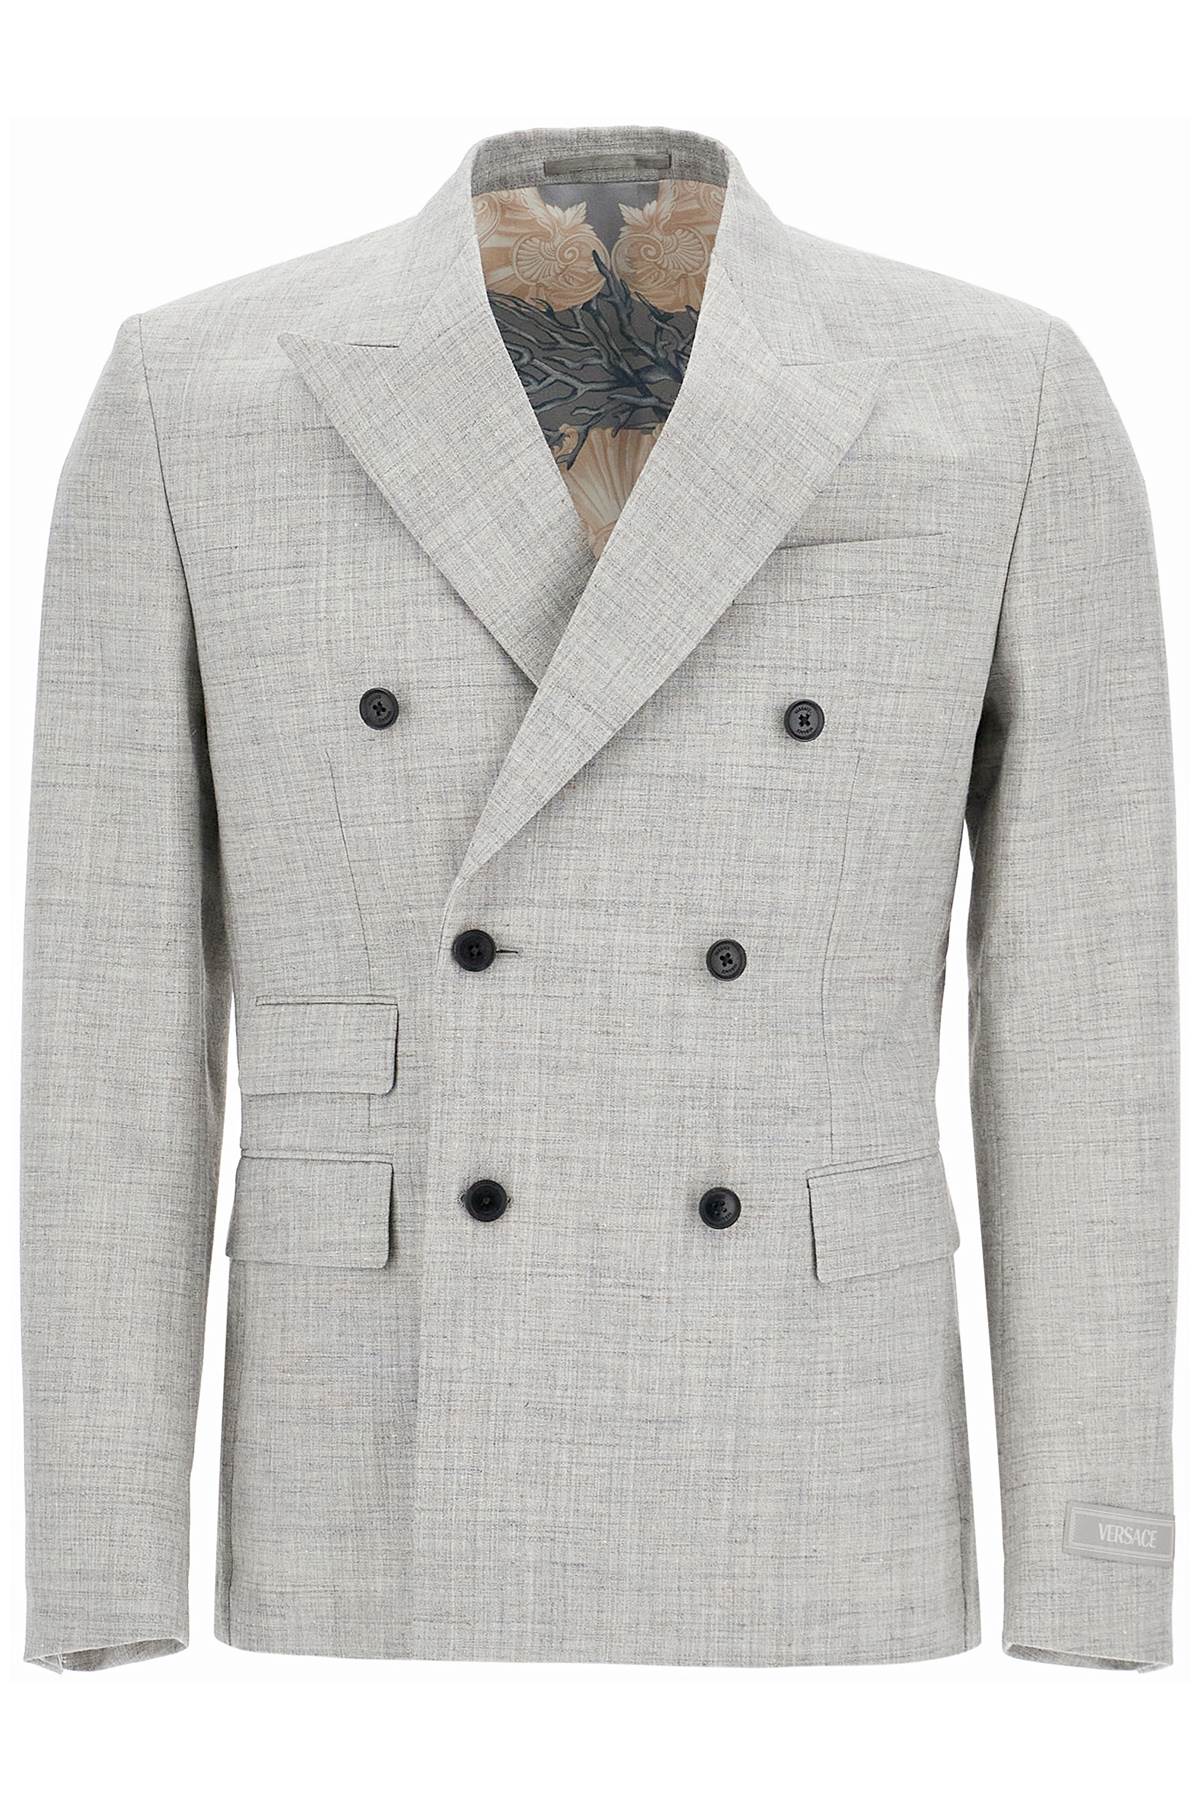 VERSACE DOUBLE-BREASTED WOOL BLEND BLAZER